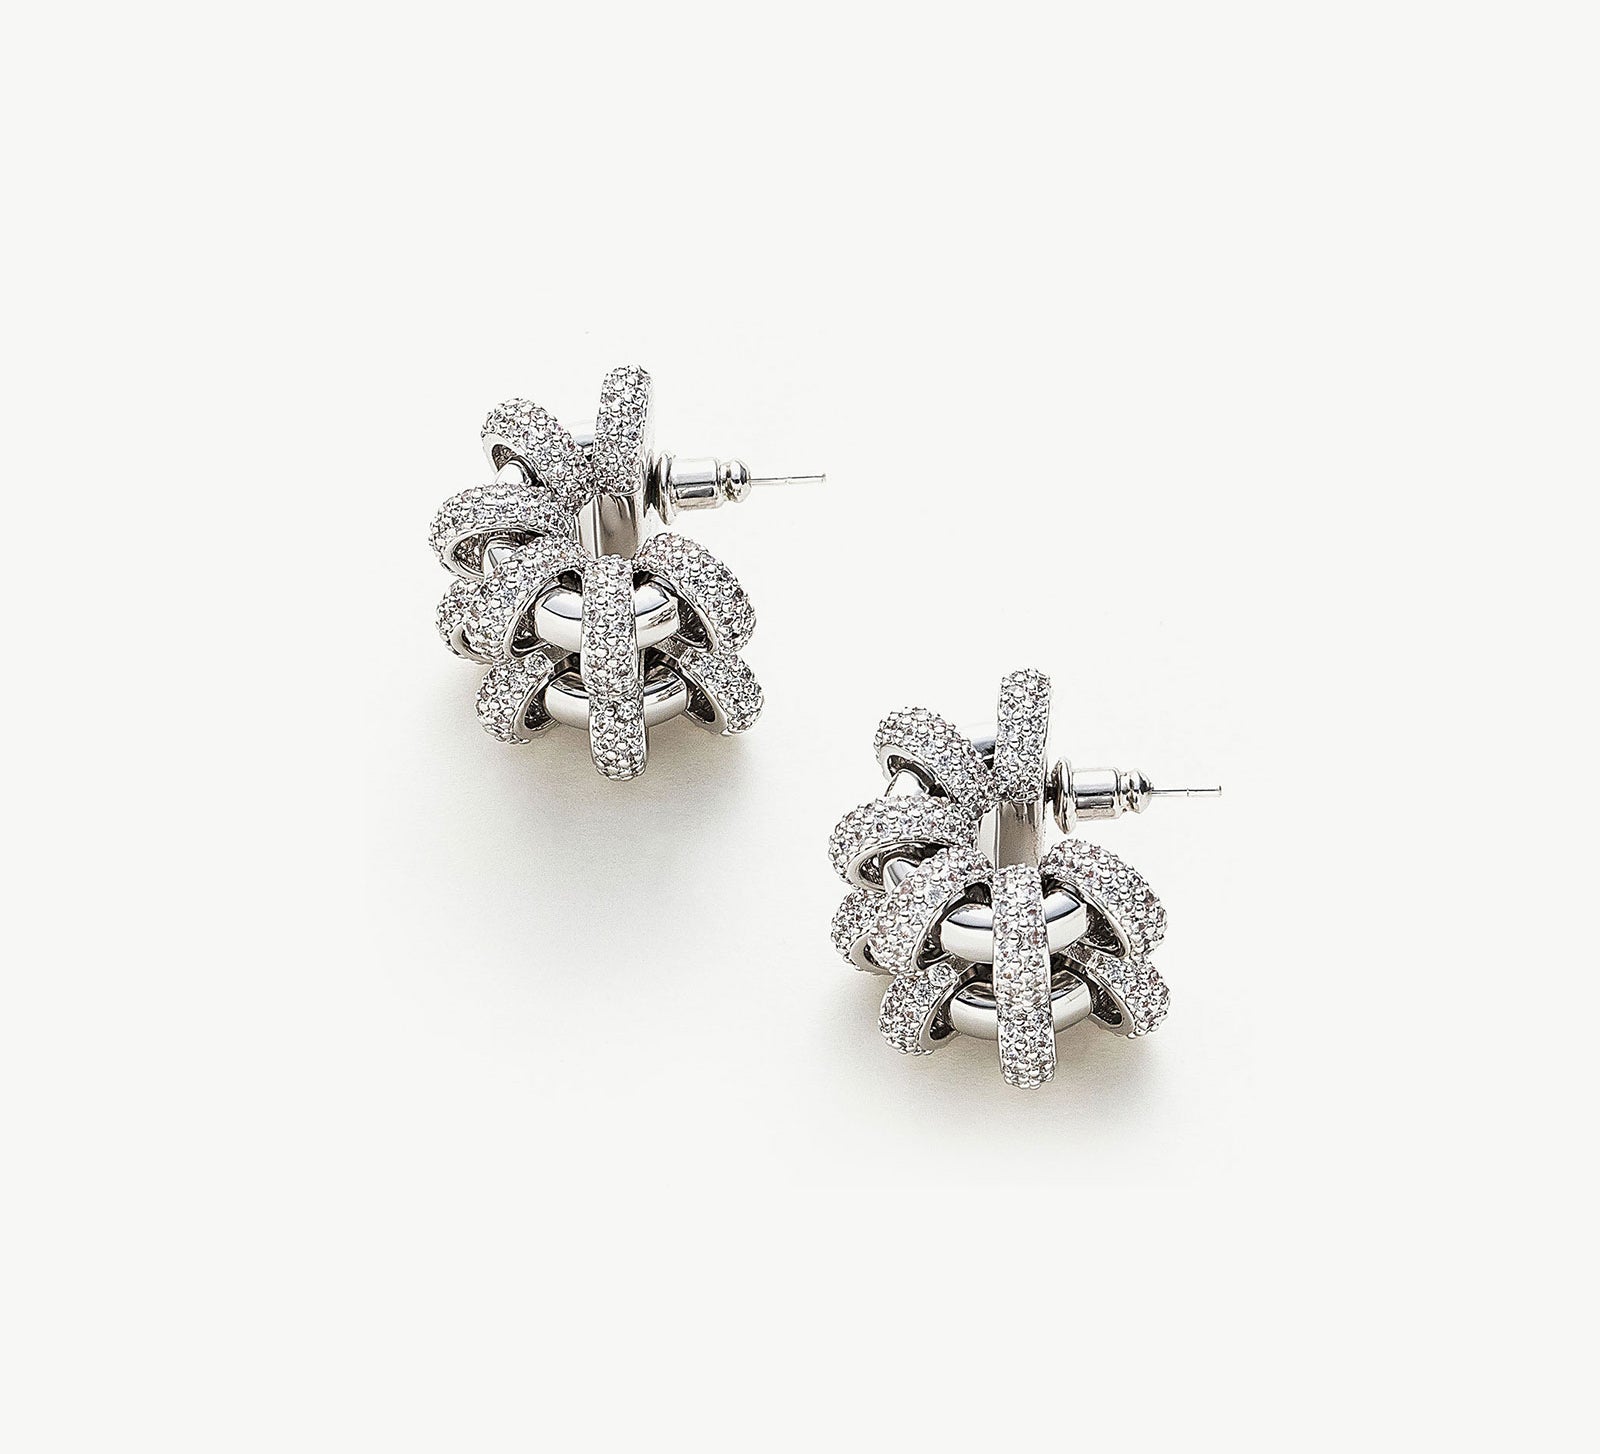 Coiled Double Earrings, showcasing an elegant double coil design, these earrings add a touch of sophistication and modern style to your ear ensemble